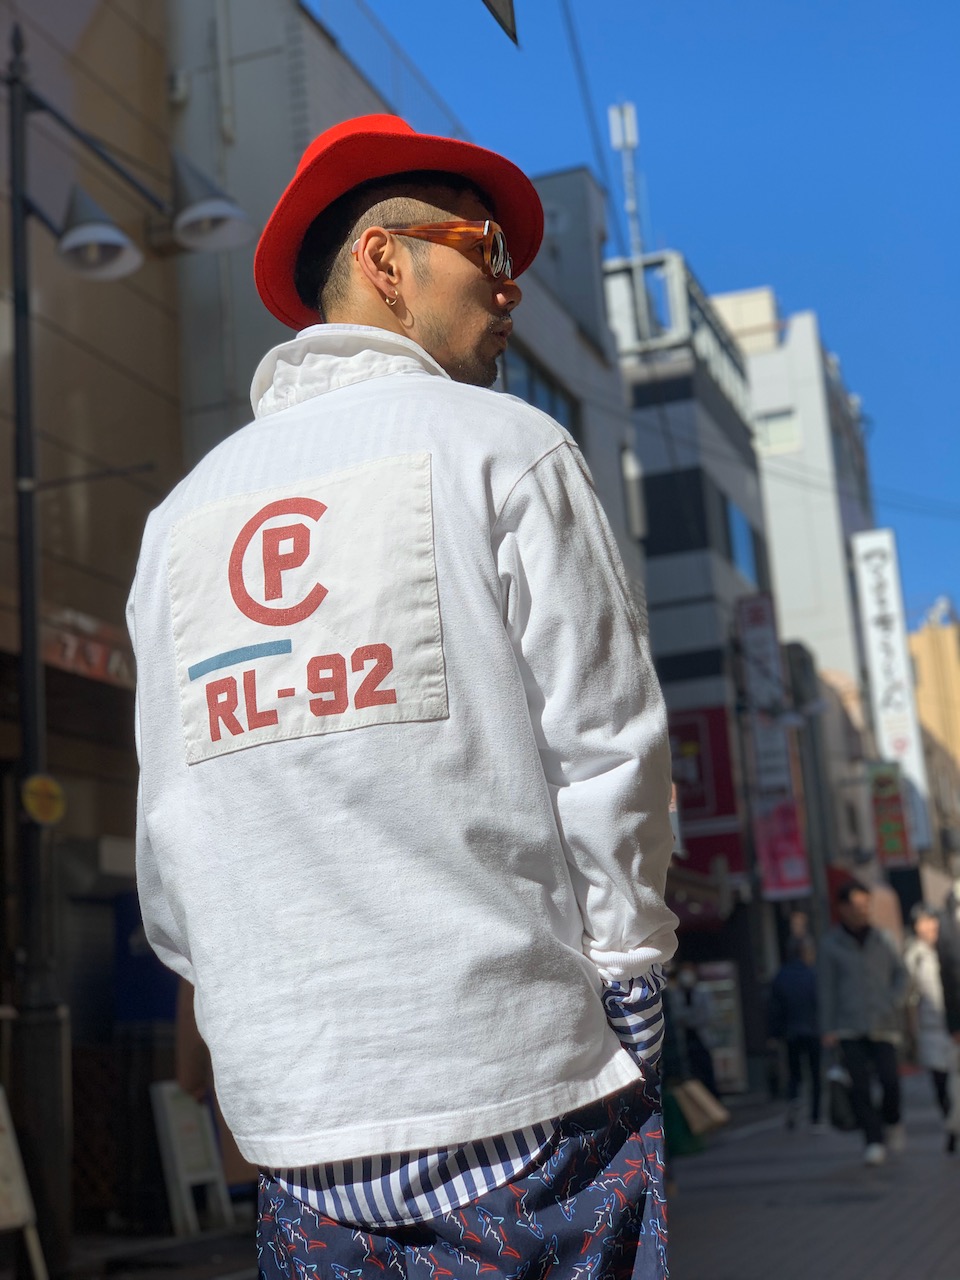 RL-92 rugby style